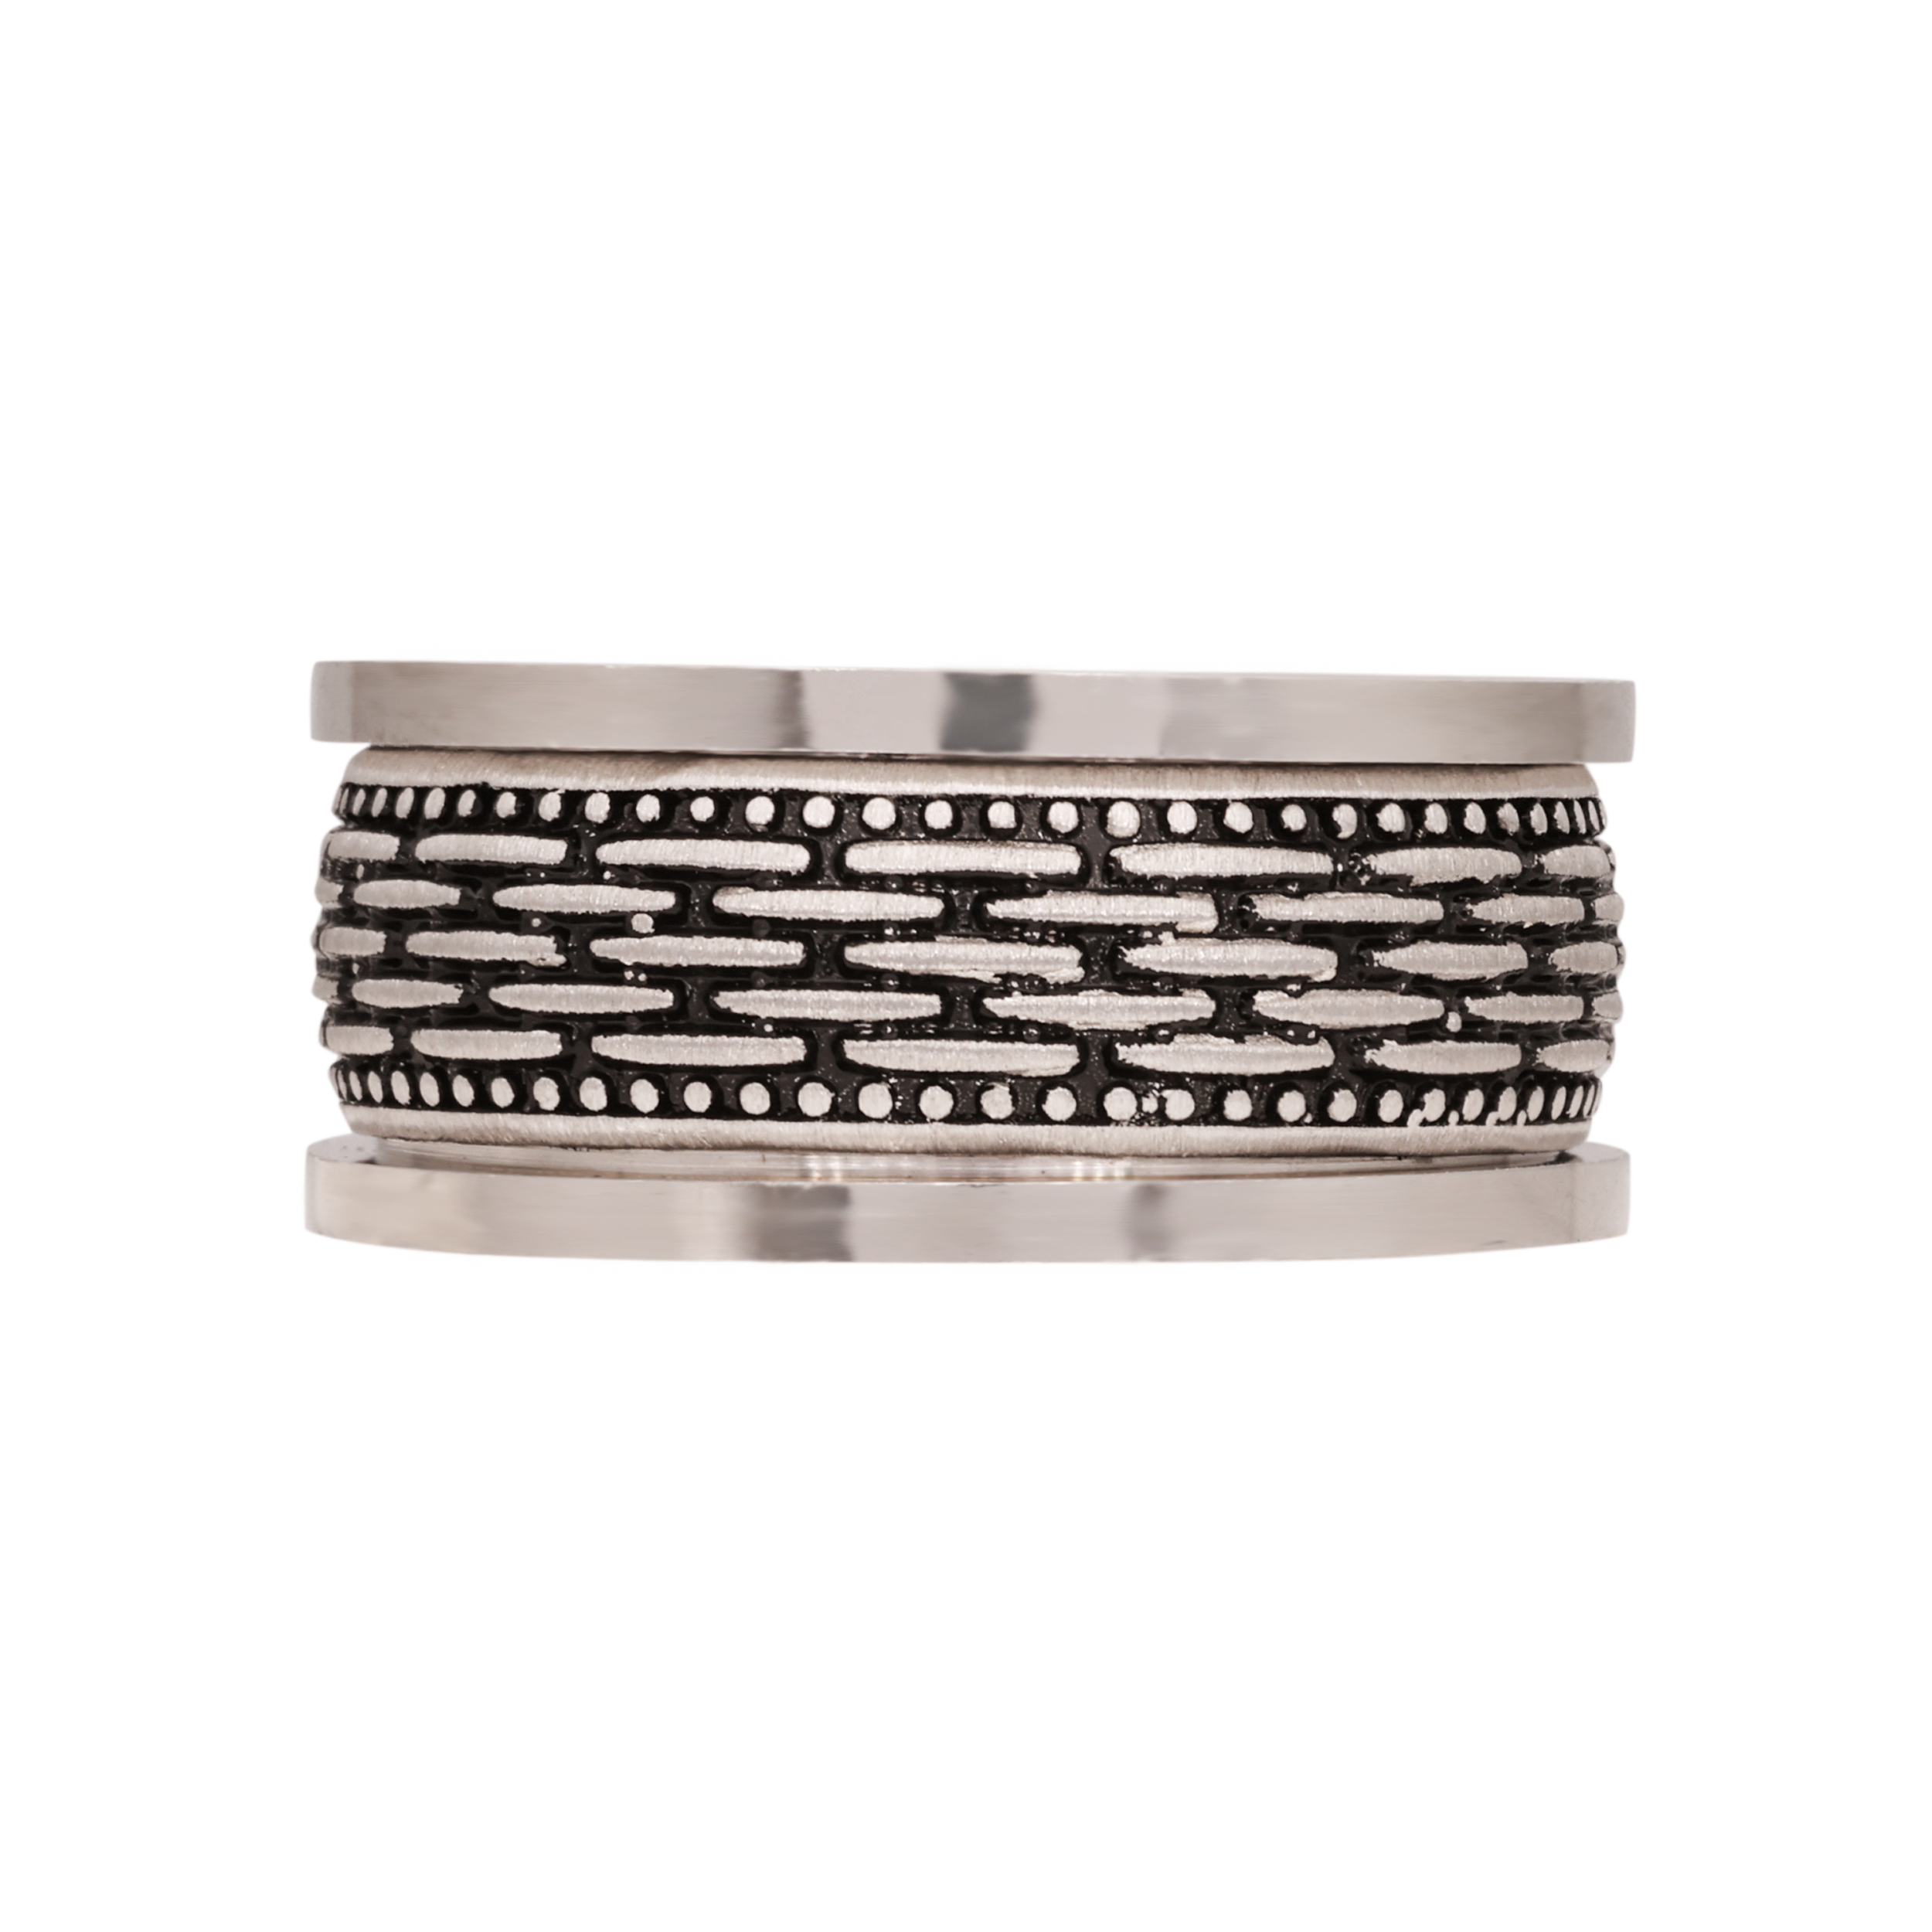 STERLING SILVER OXIDIZED BAND RING | SKU: 0018640854